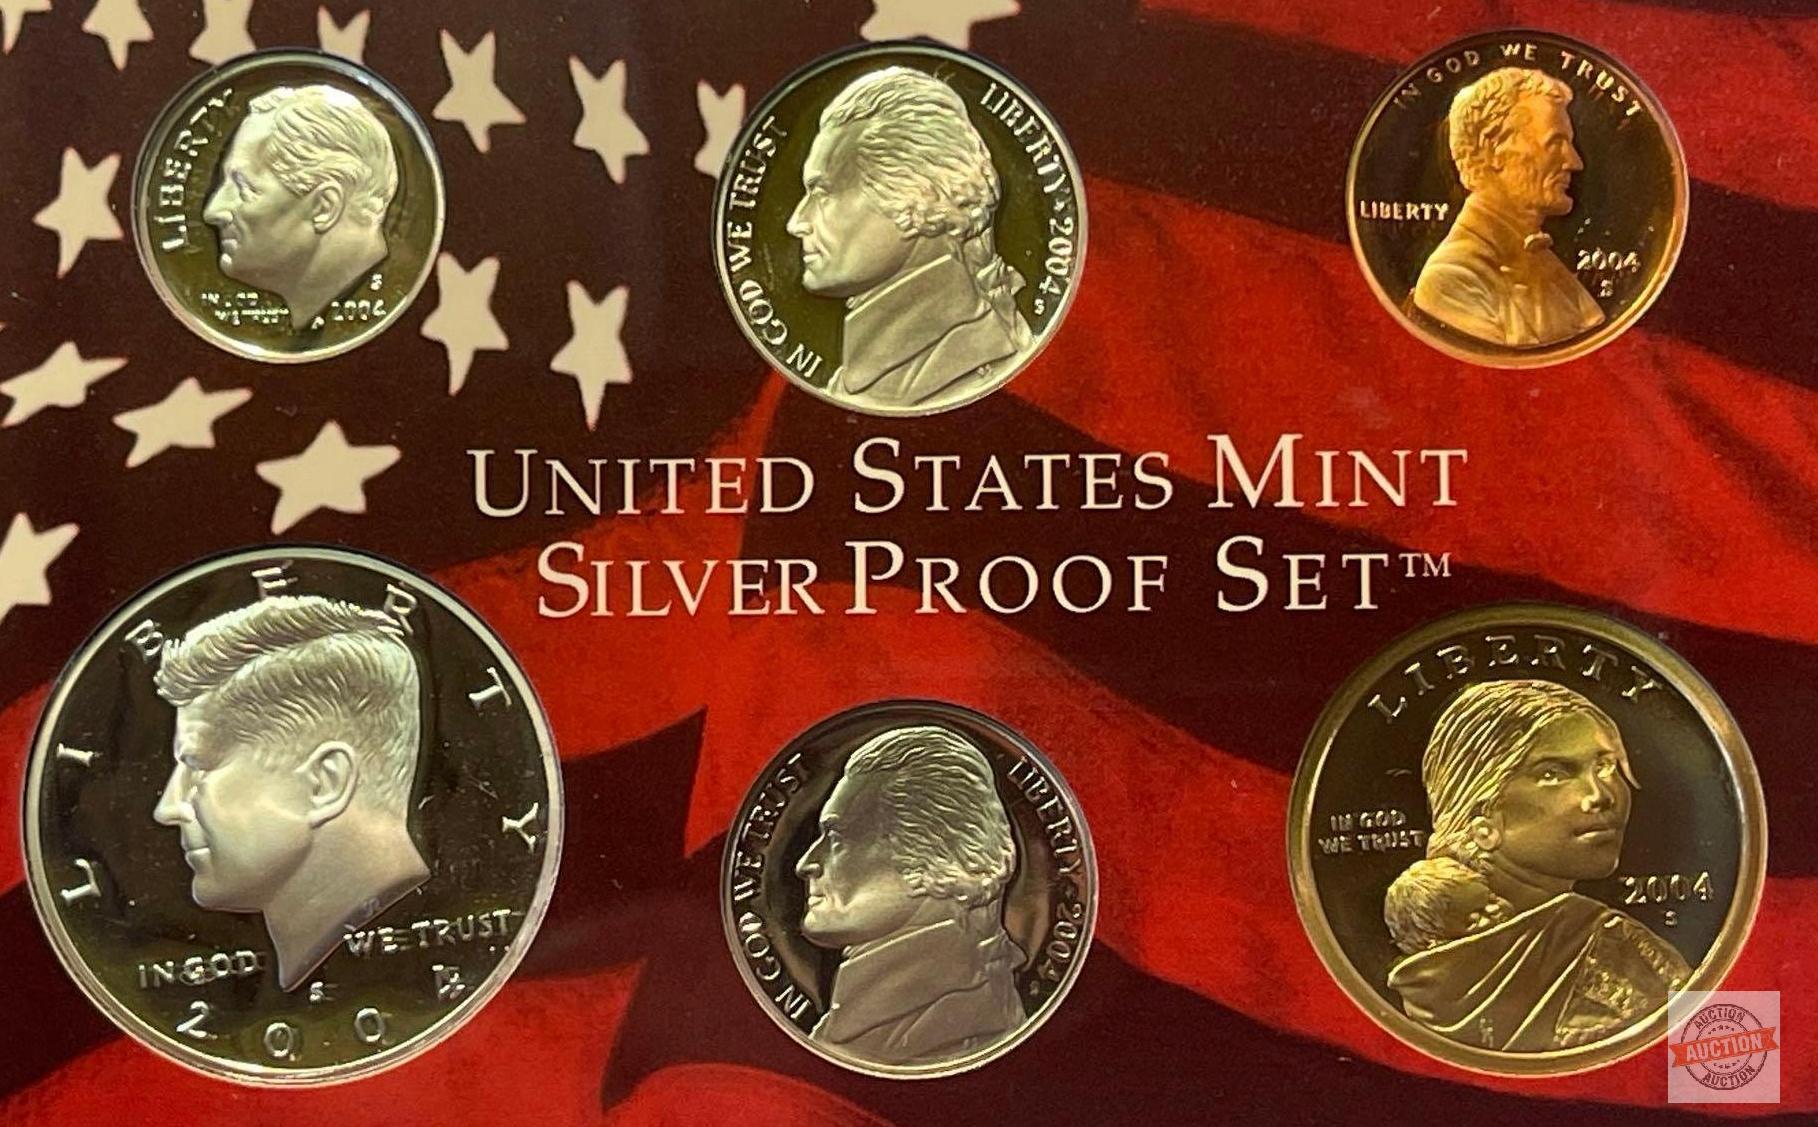 Silver - 2004s US Mint Silver Proof Set, 11 coins (7-90% silver)